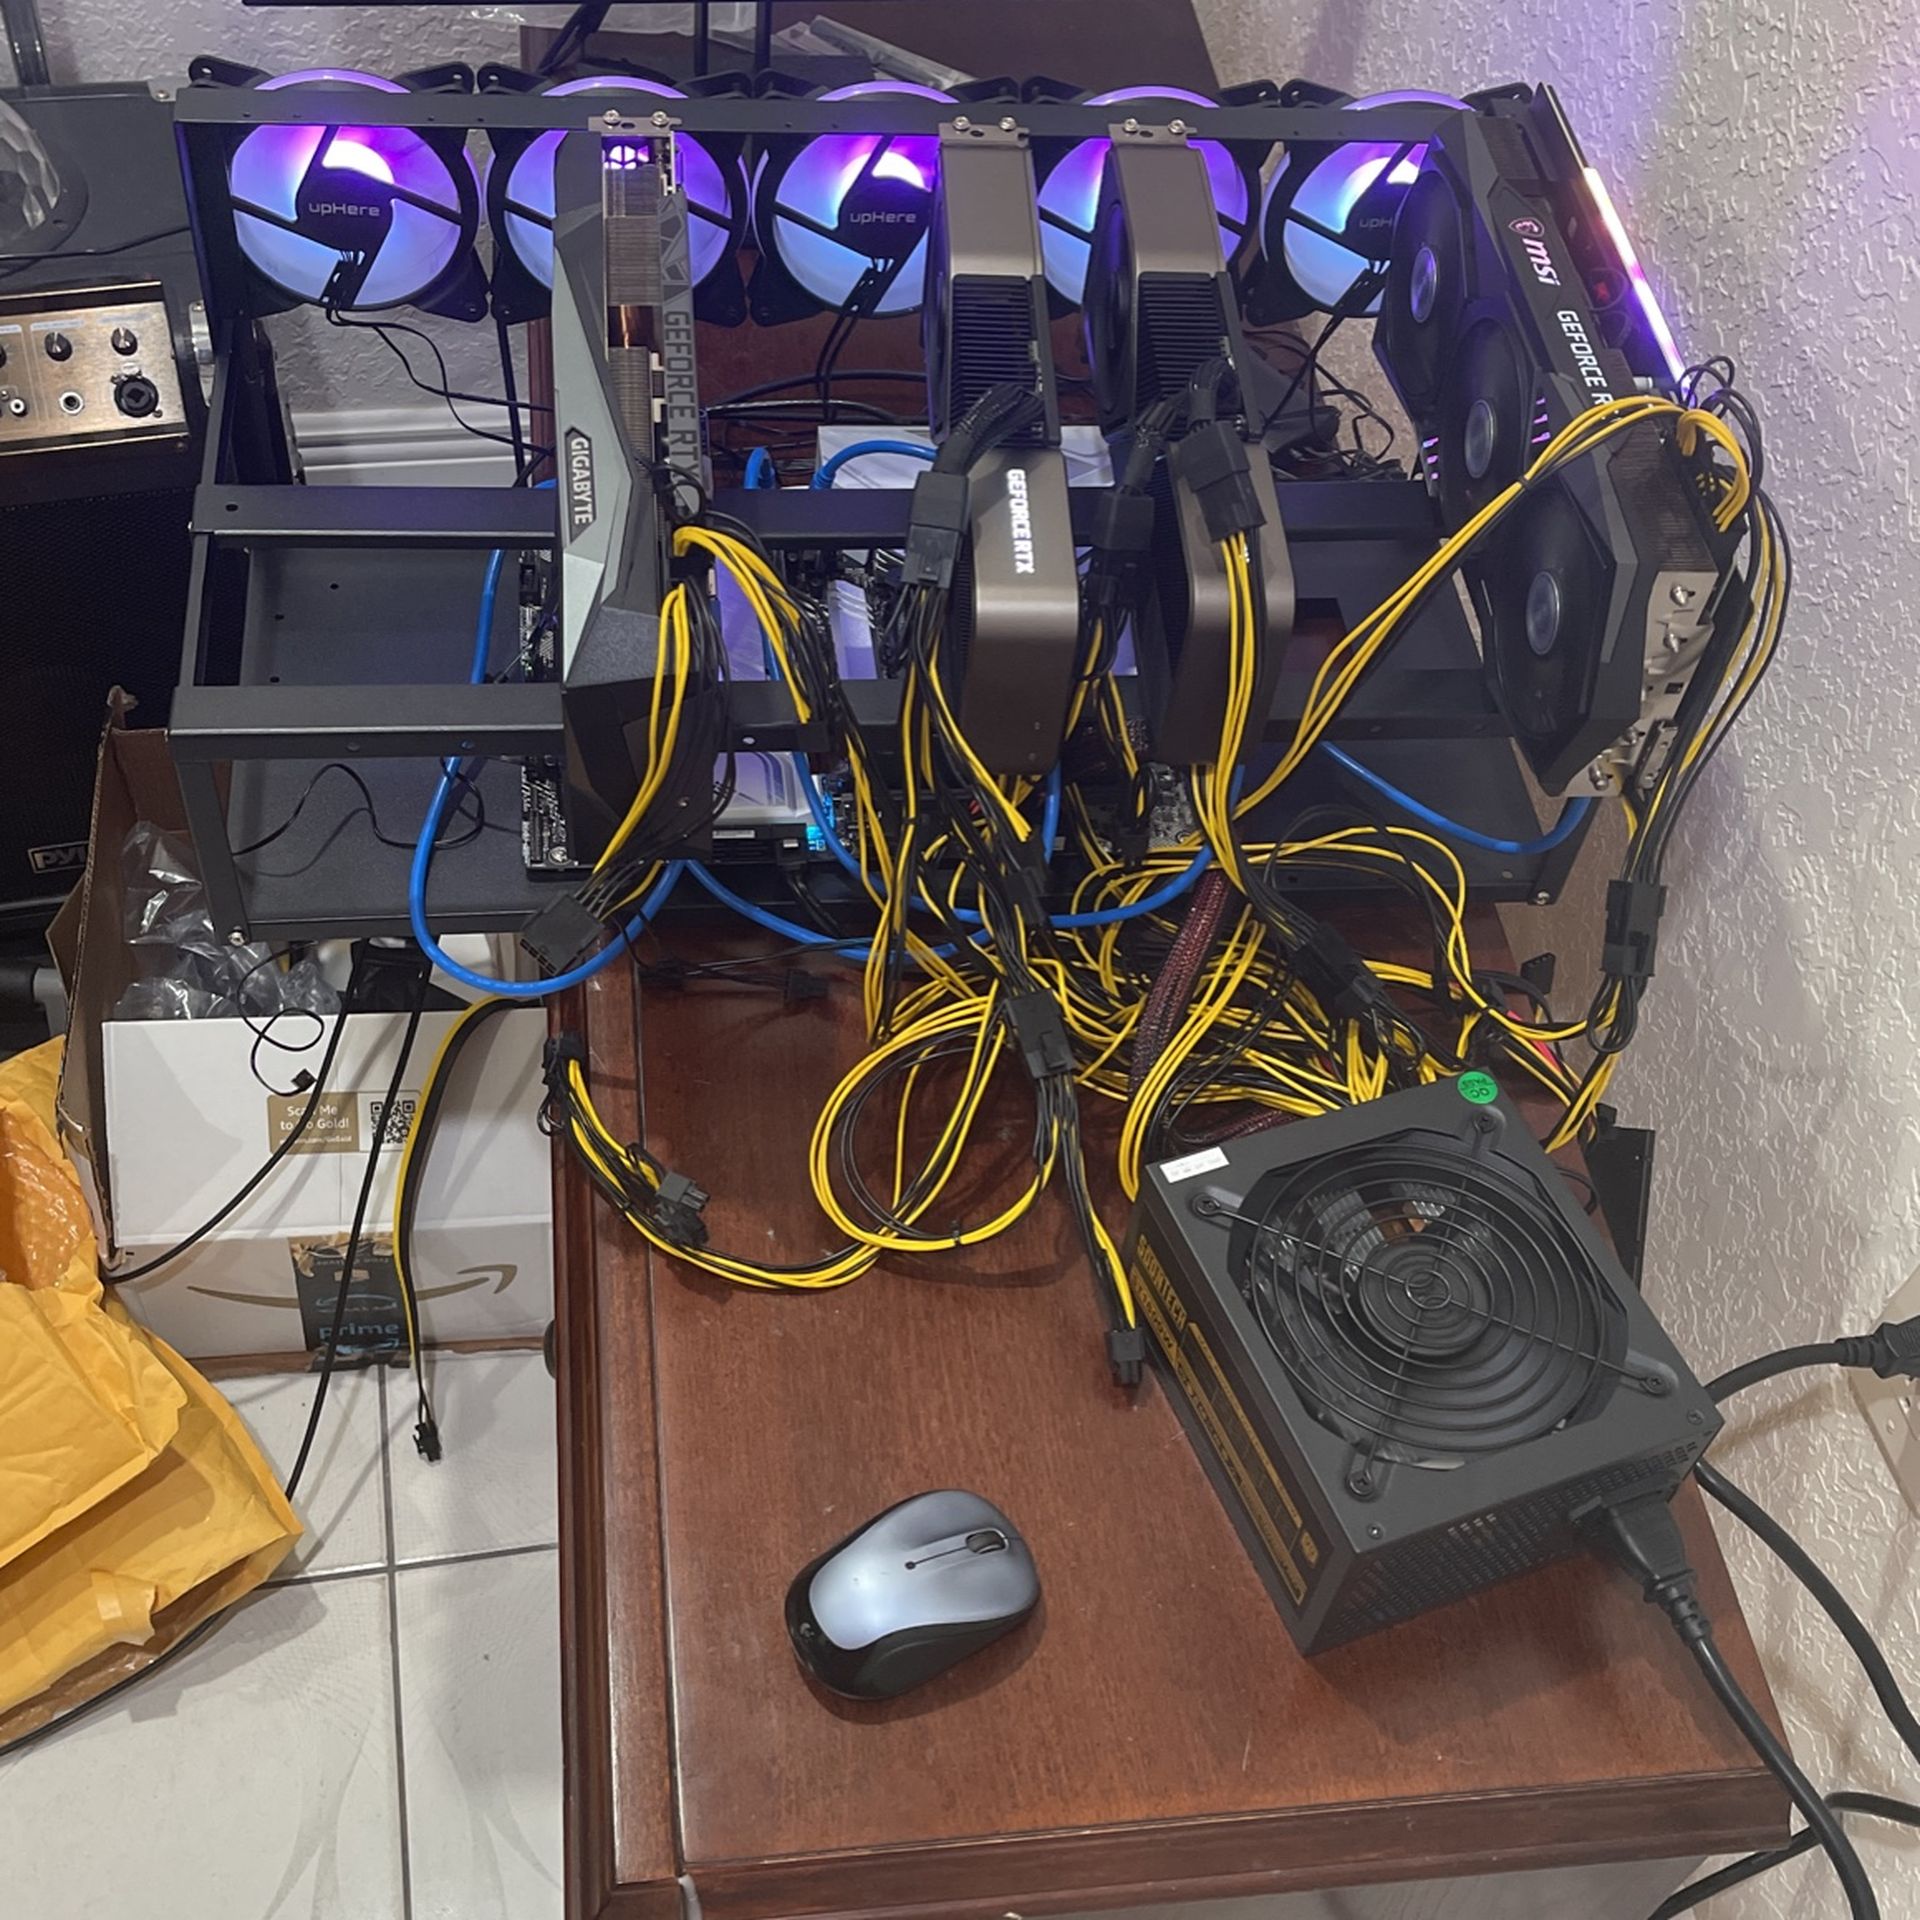 Make $600 Per Month With Mining Rig